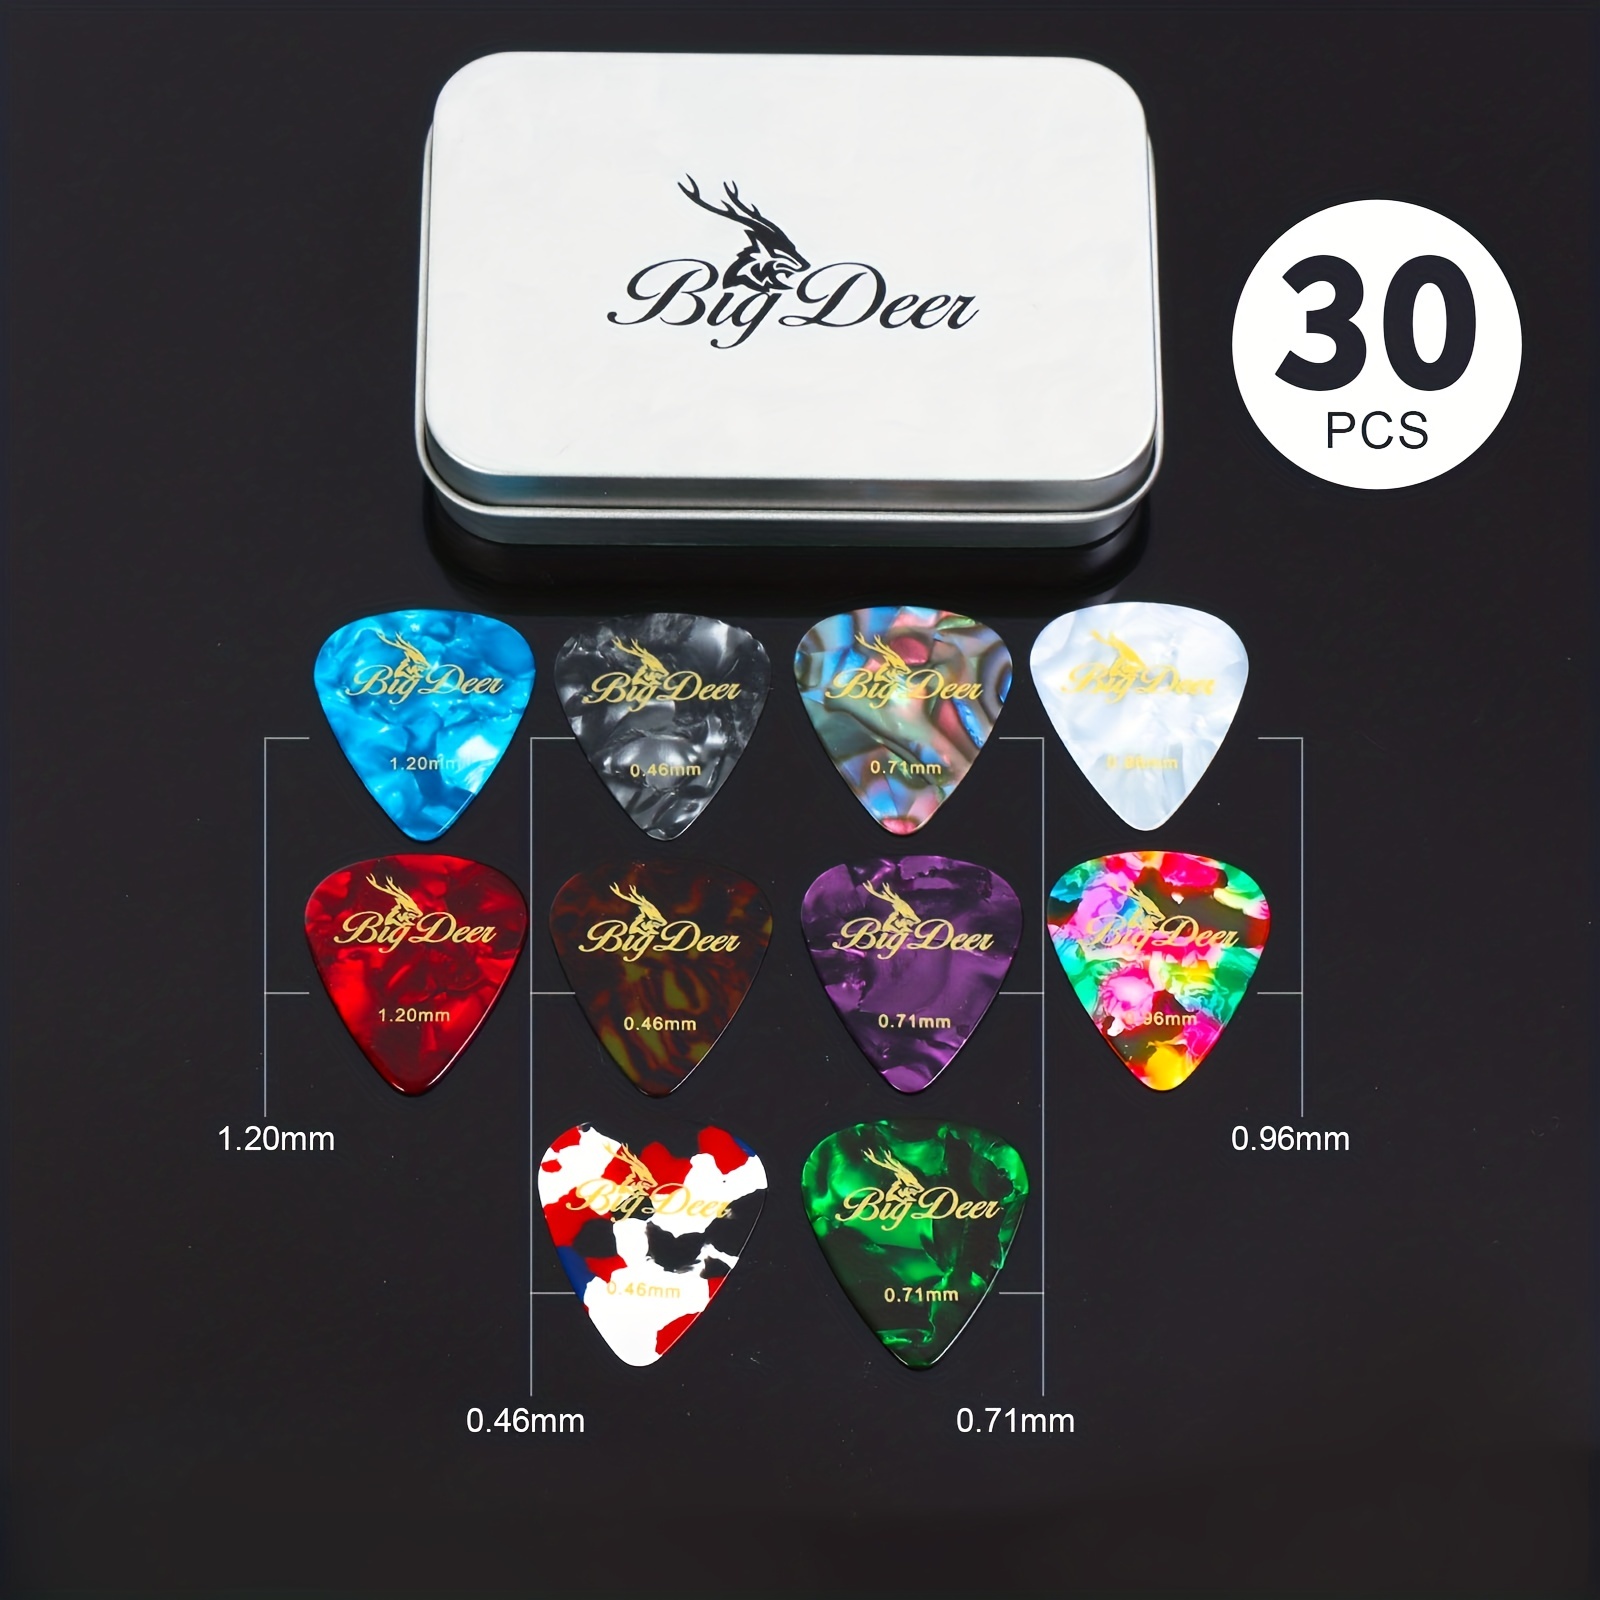 Donner Celluloid Guitar Picks 48 Pack with Case Includes Thin, Medium,  Heavy & Extra Heavy Gauges 